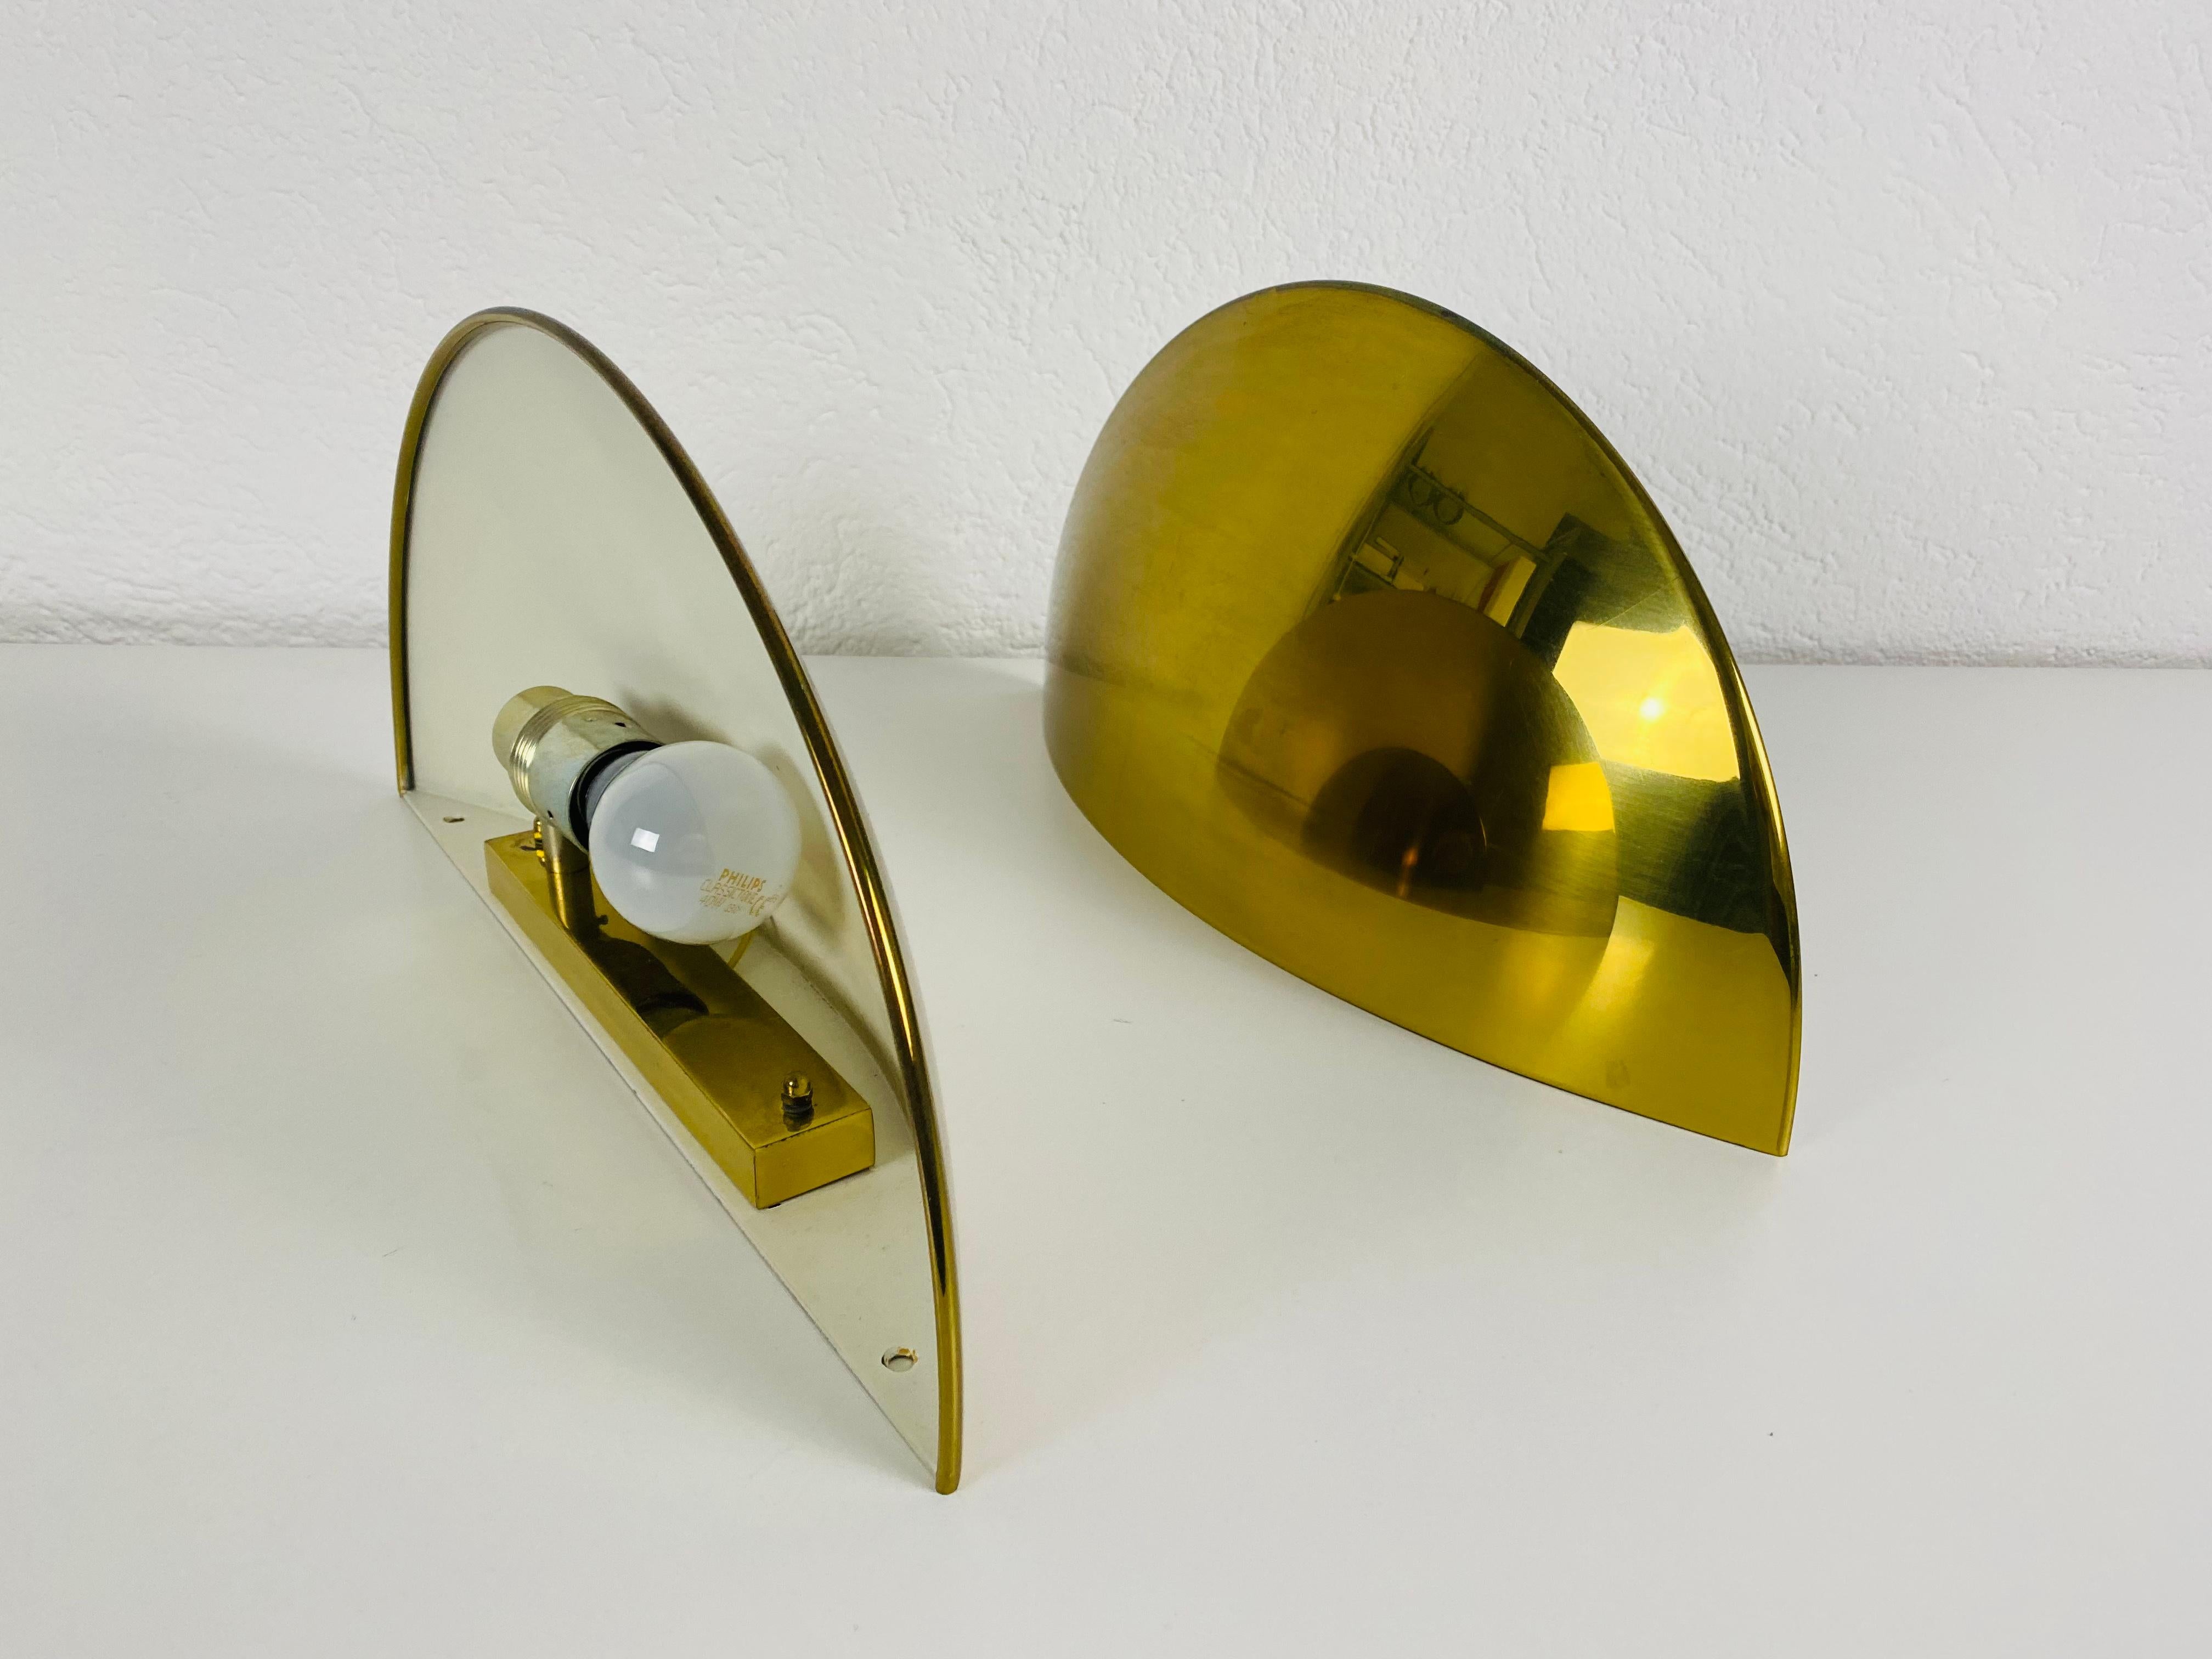 Pair of Florian Schulz Midcentury Brass Wall Lamps, 1960s For Sale 3